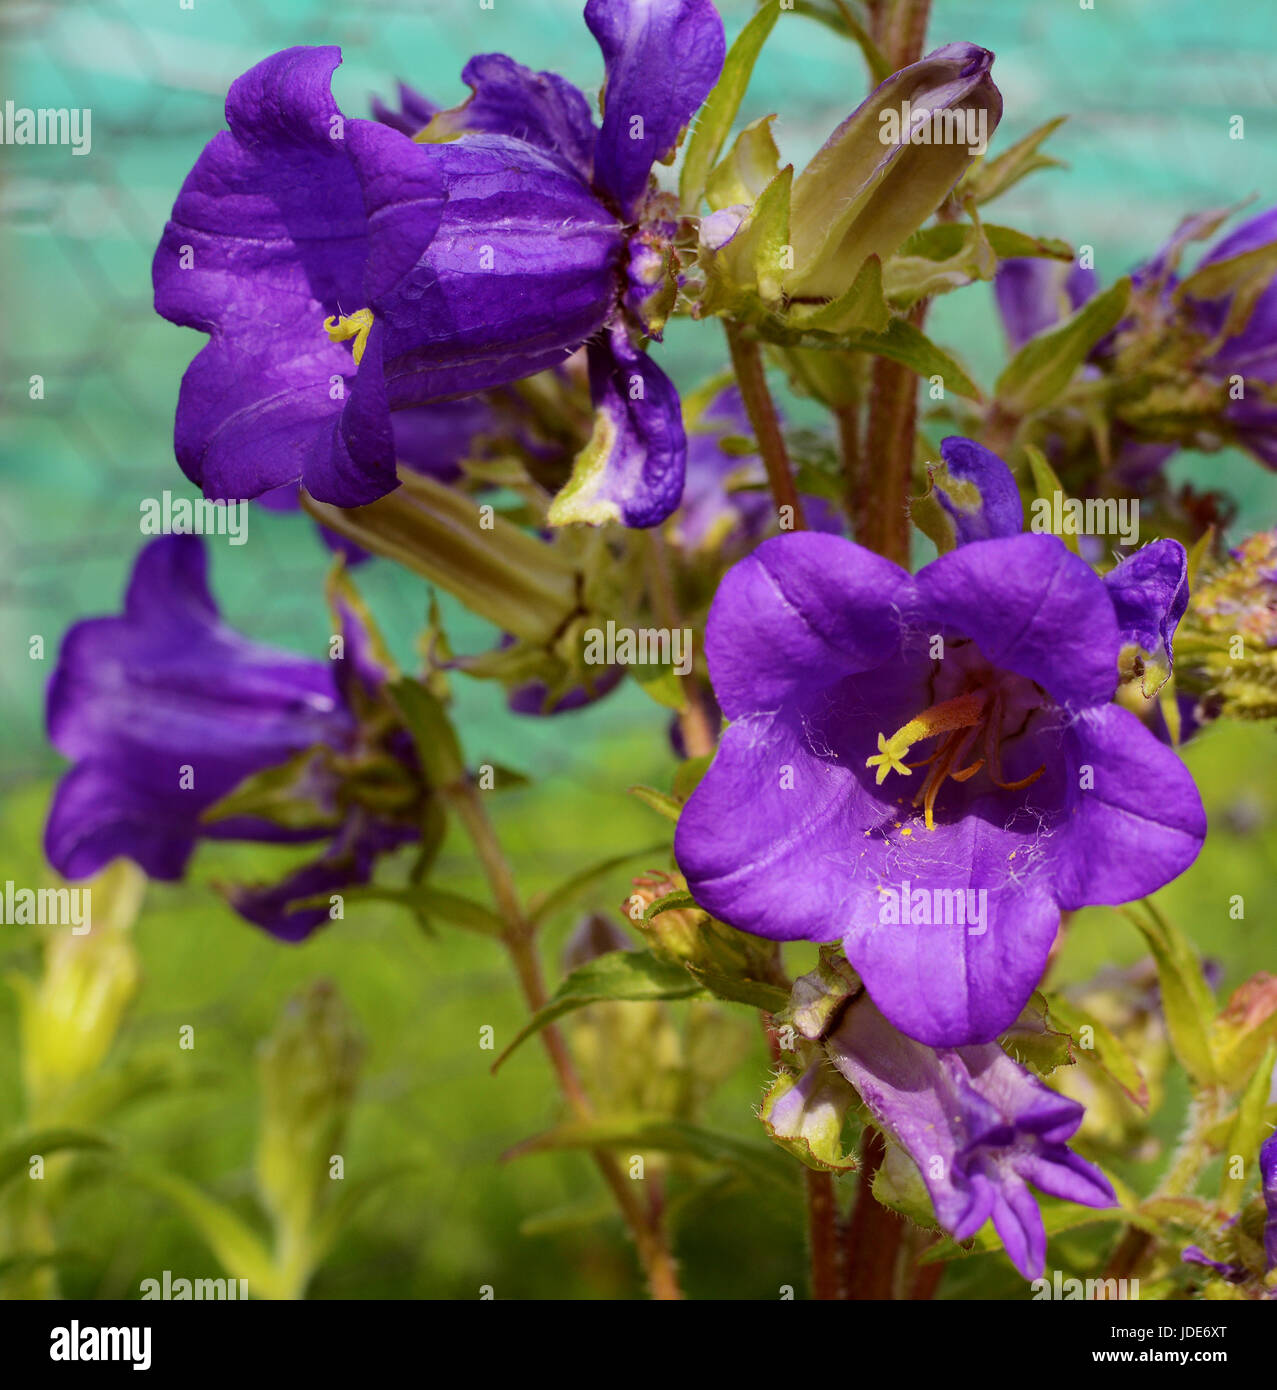 Purple flowers of a campanula plant growing in a garden - also known as Canterbury Bells Stock Photo